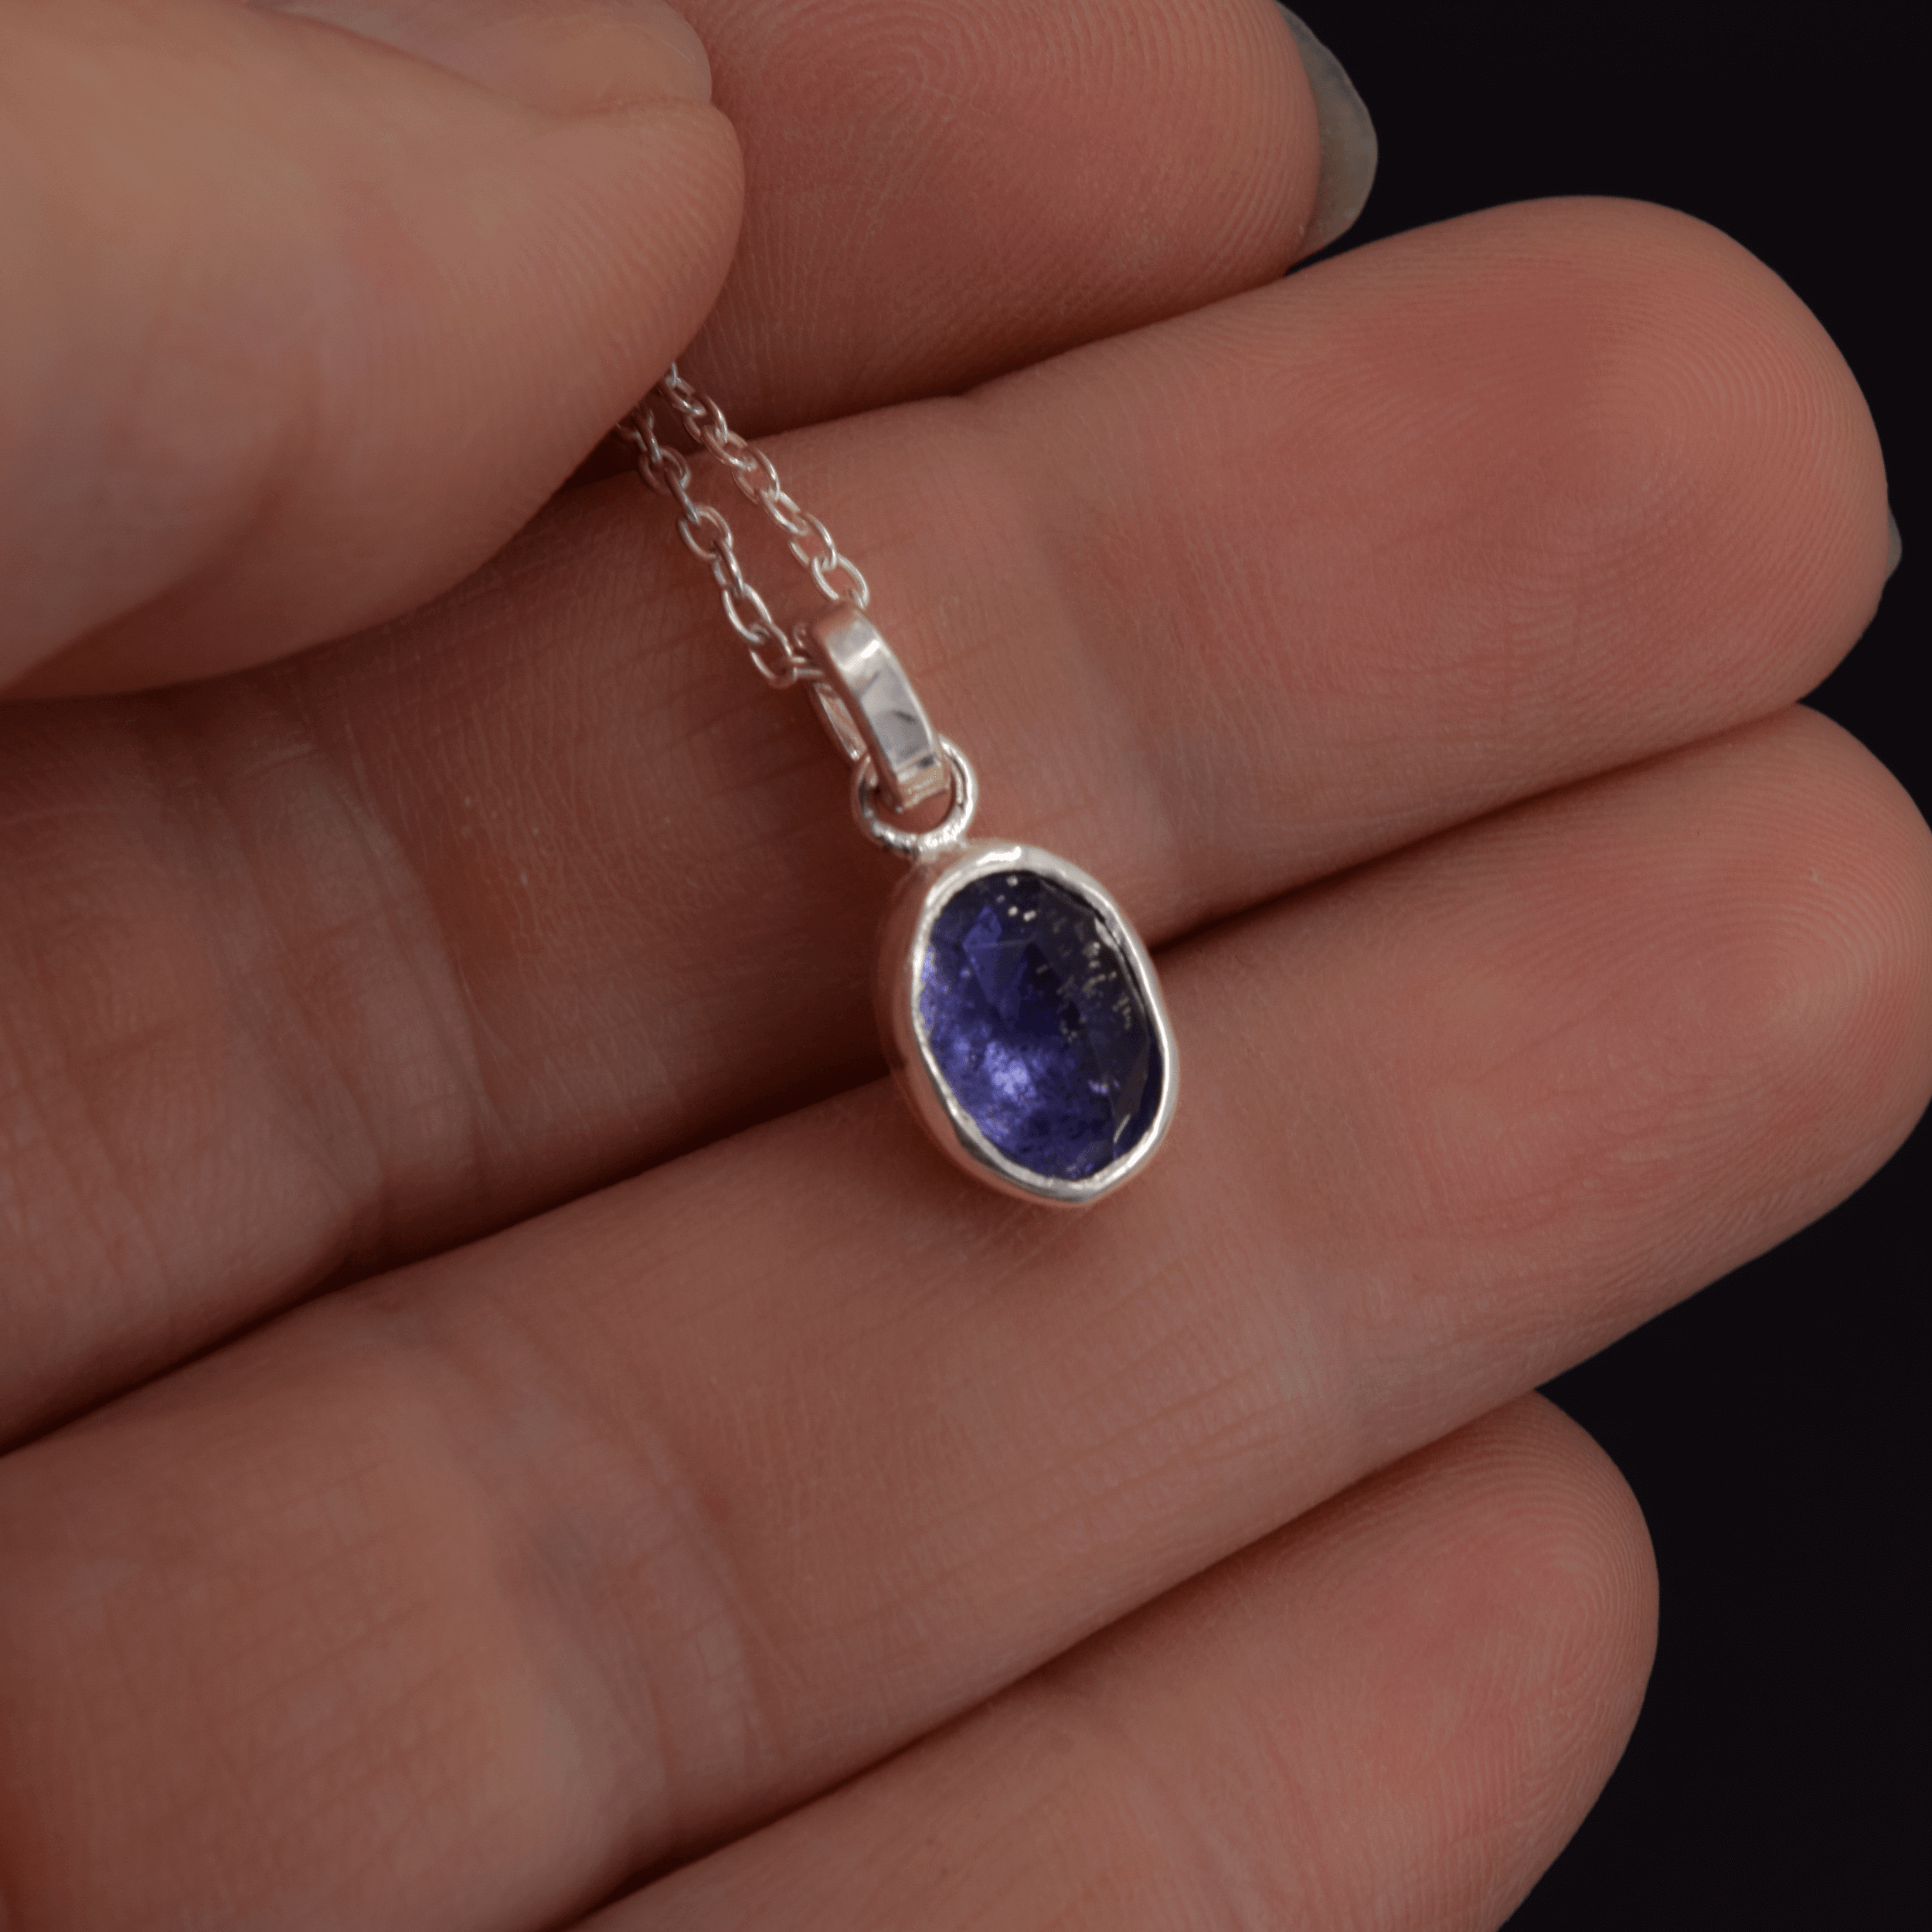 Oval rosecut iolite pendant necklace in sterling silver hanging on a cable chain shown in hand for scale